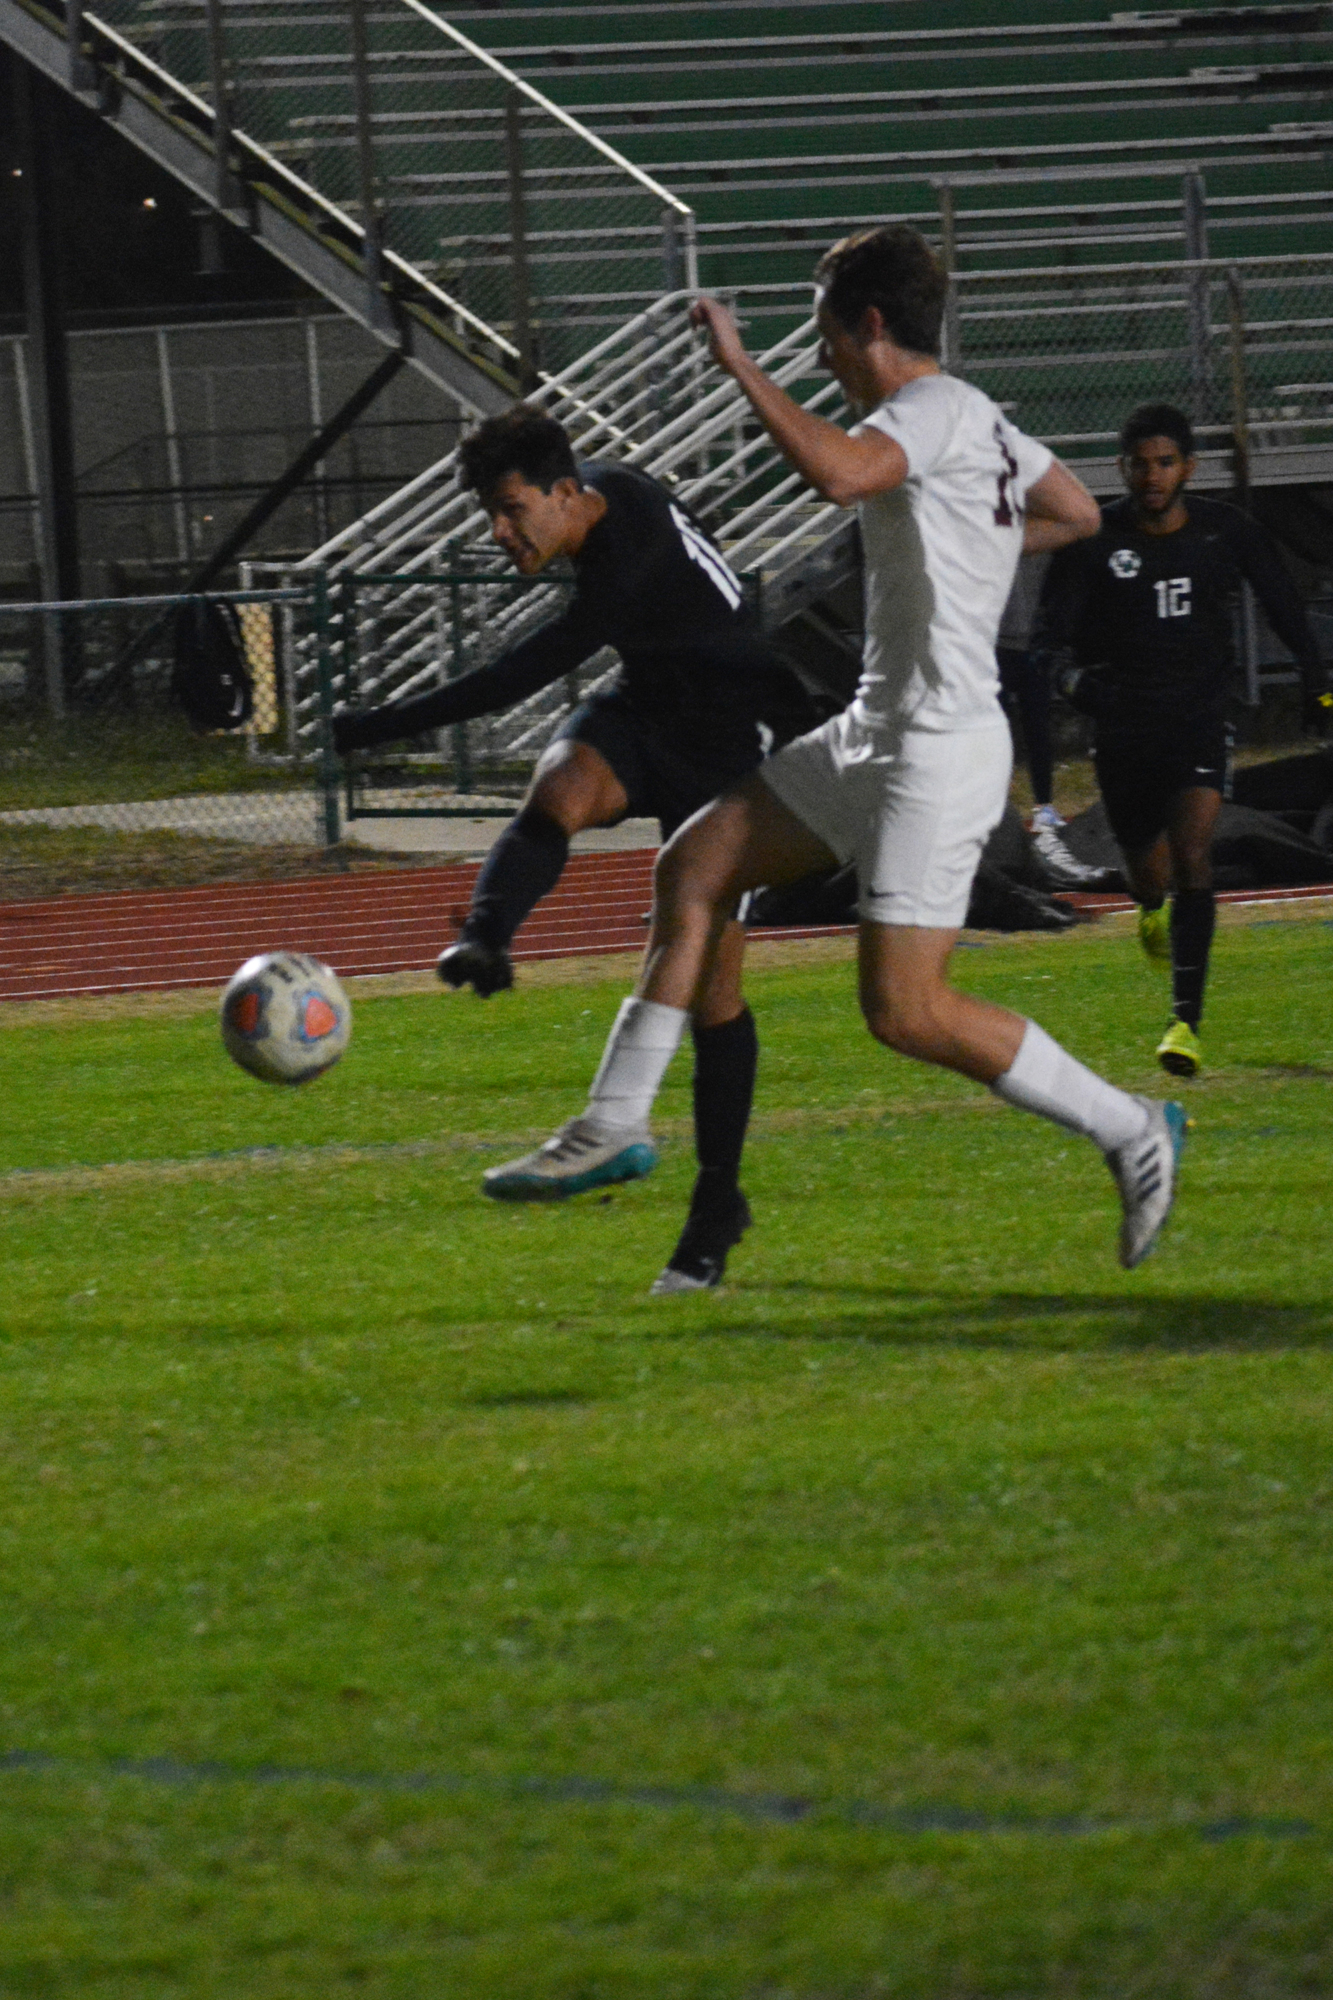 Senior forward Wilmer Yanez, whose family is from Honduras, boots a ball at the Riverview net.